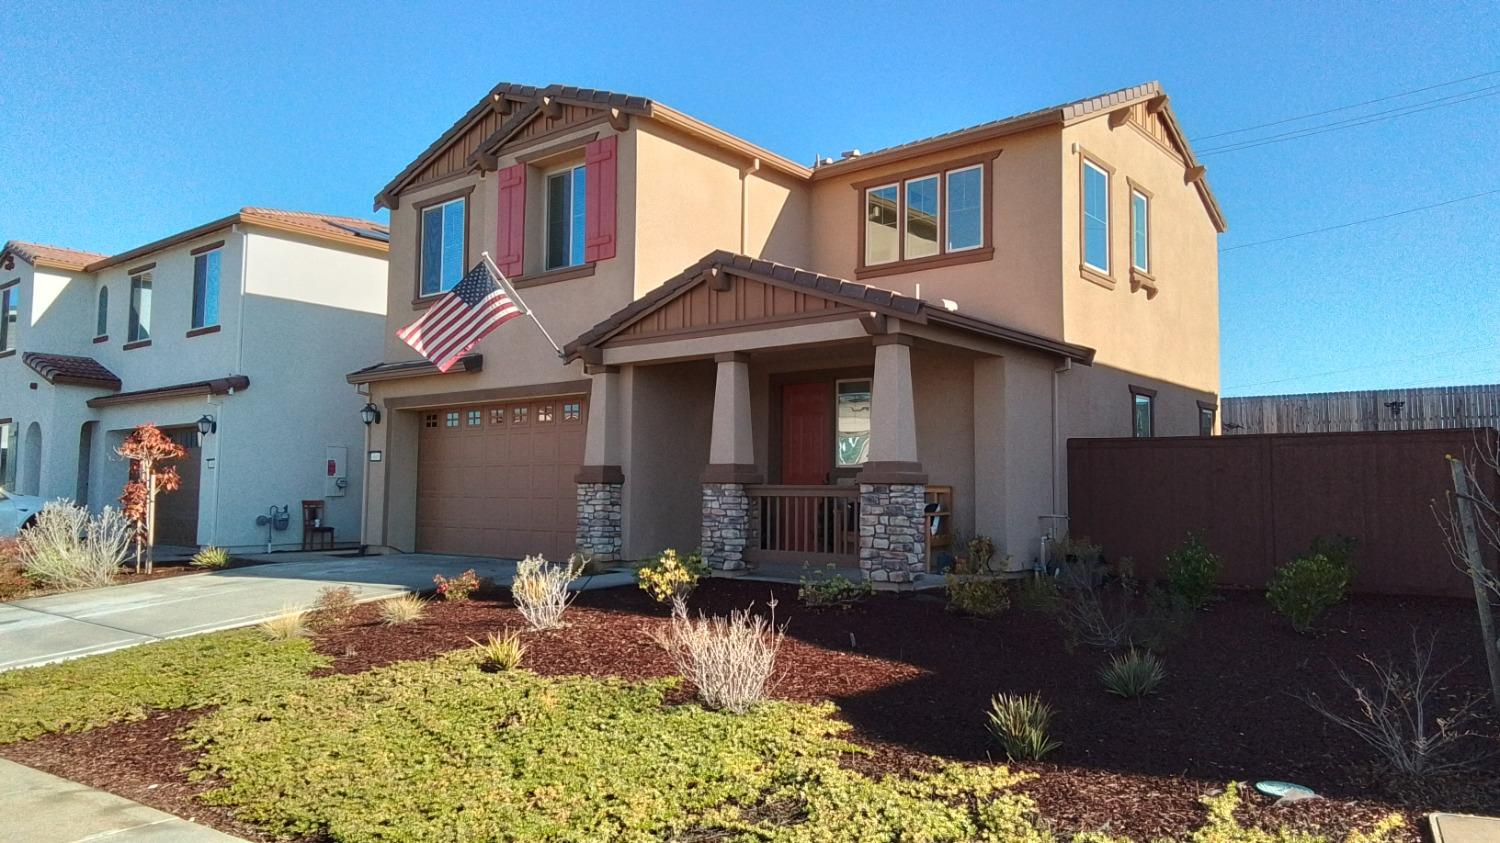 This very fresh Lennar home is 2 yrs old and shows like a model. No HOA fees with welcoming wider st